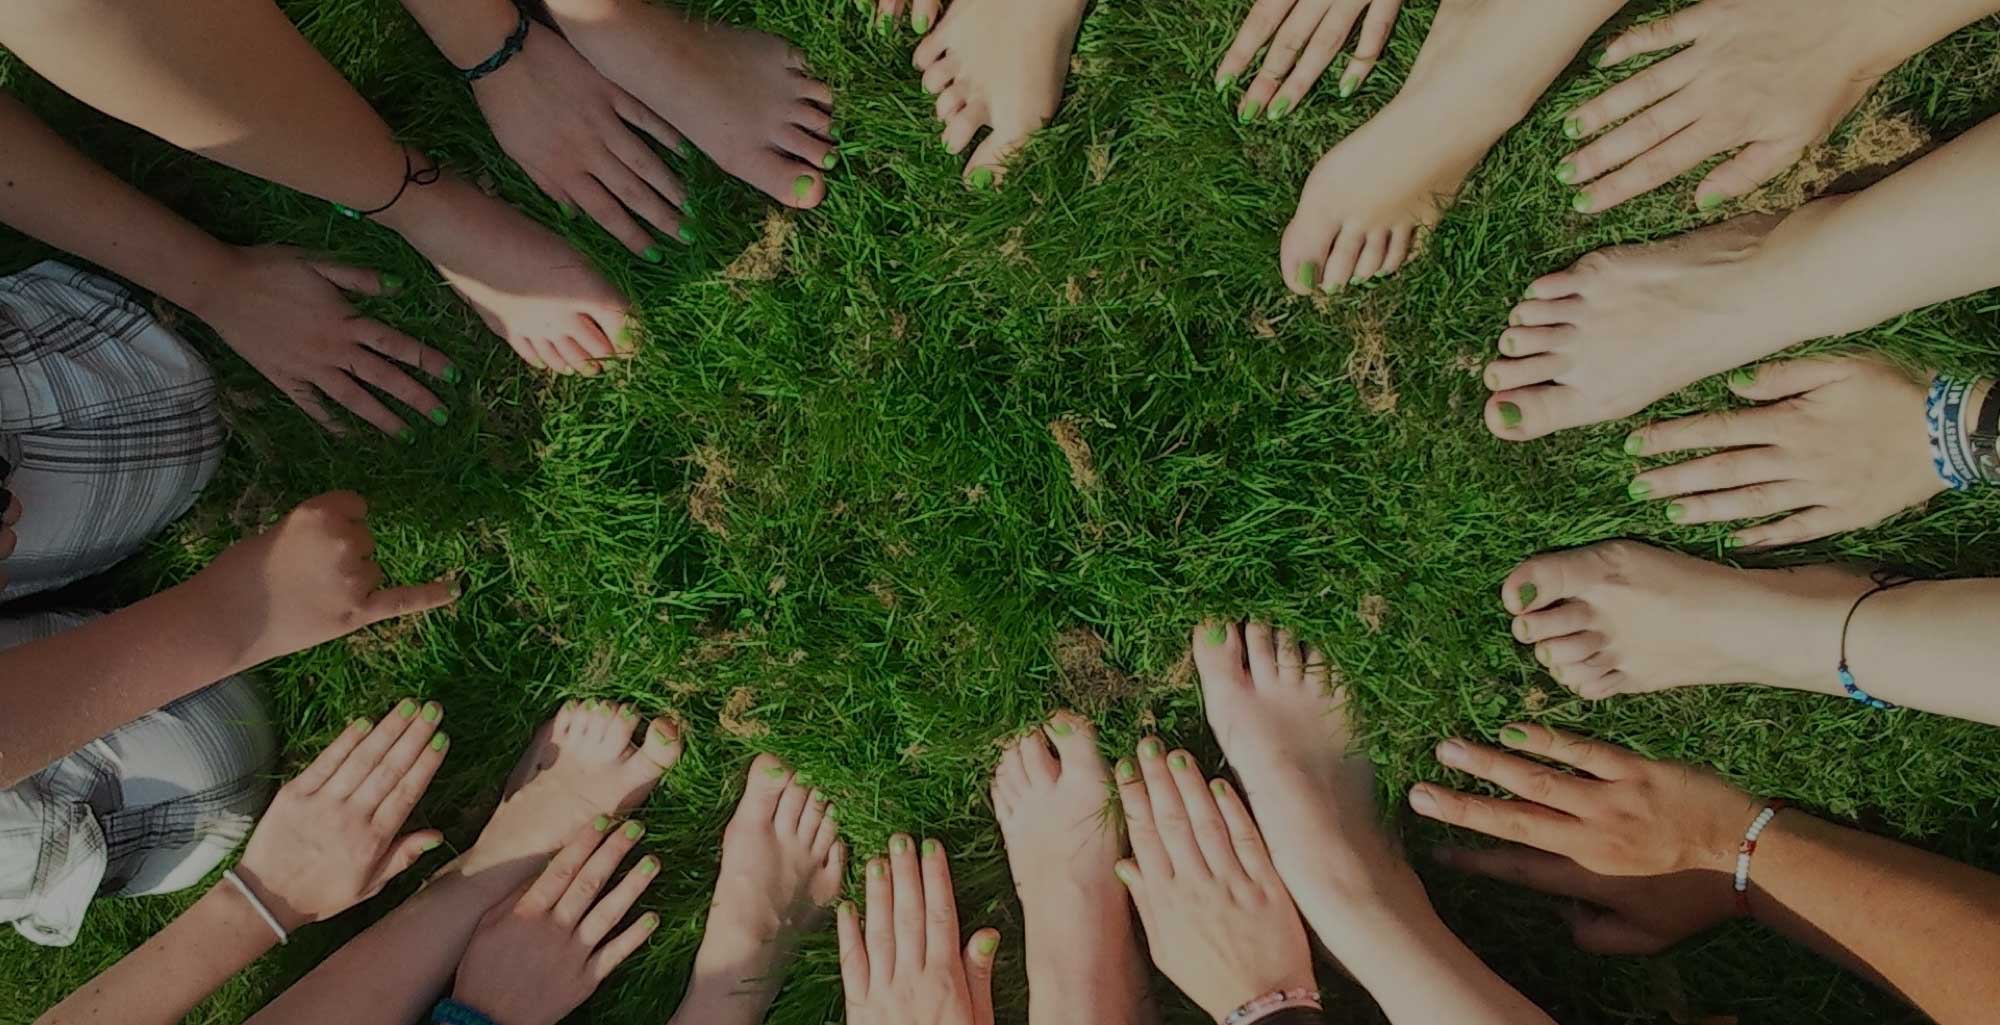 Image of people's hands and feet in the grass.